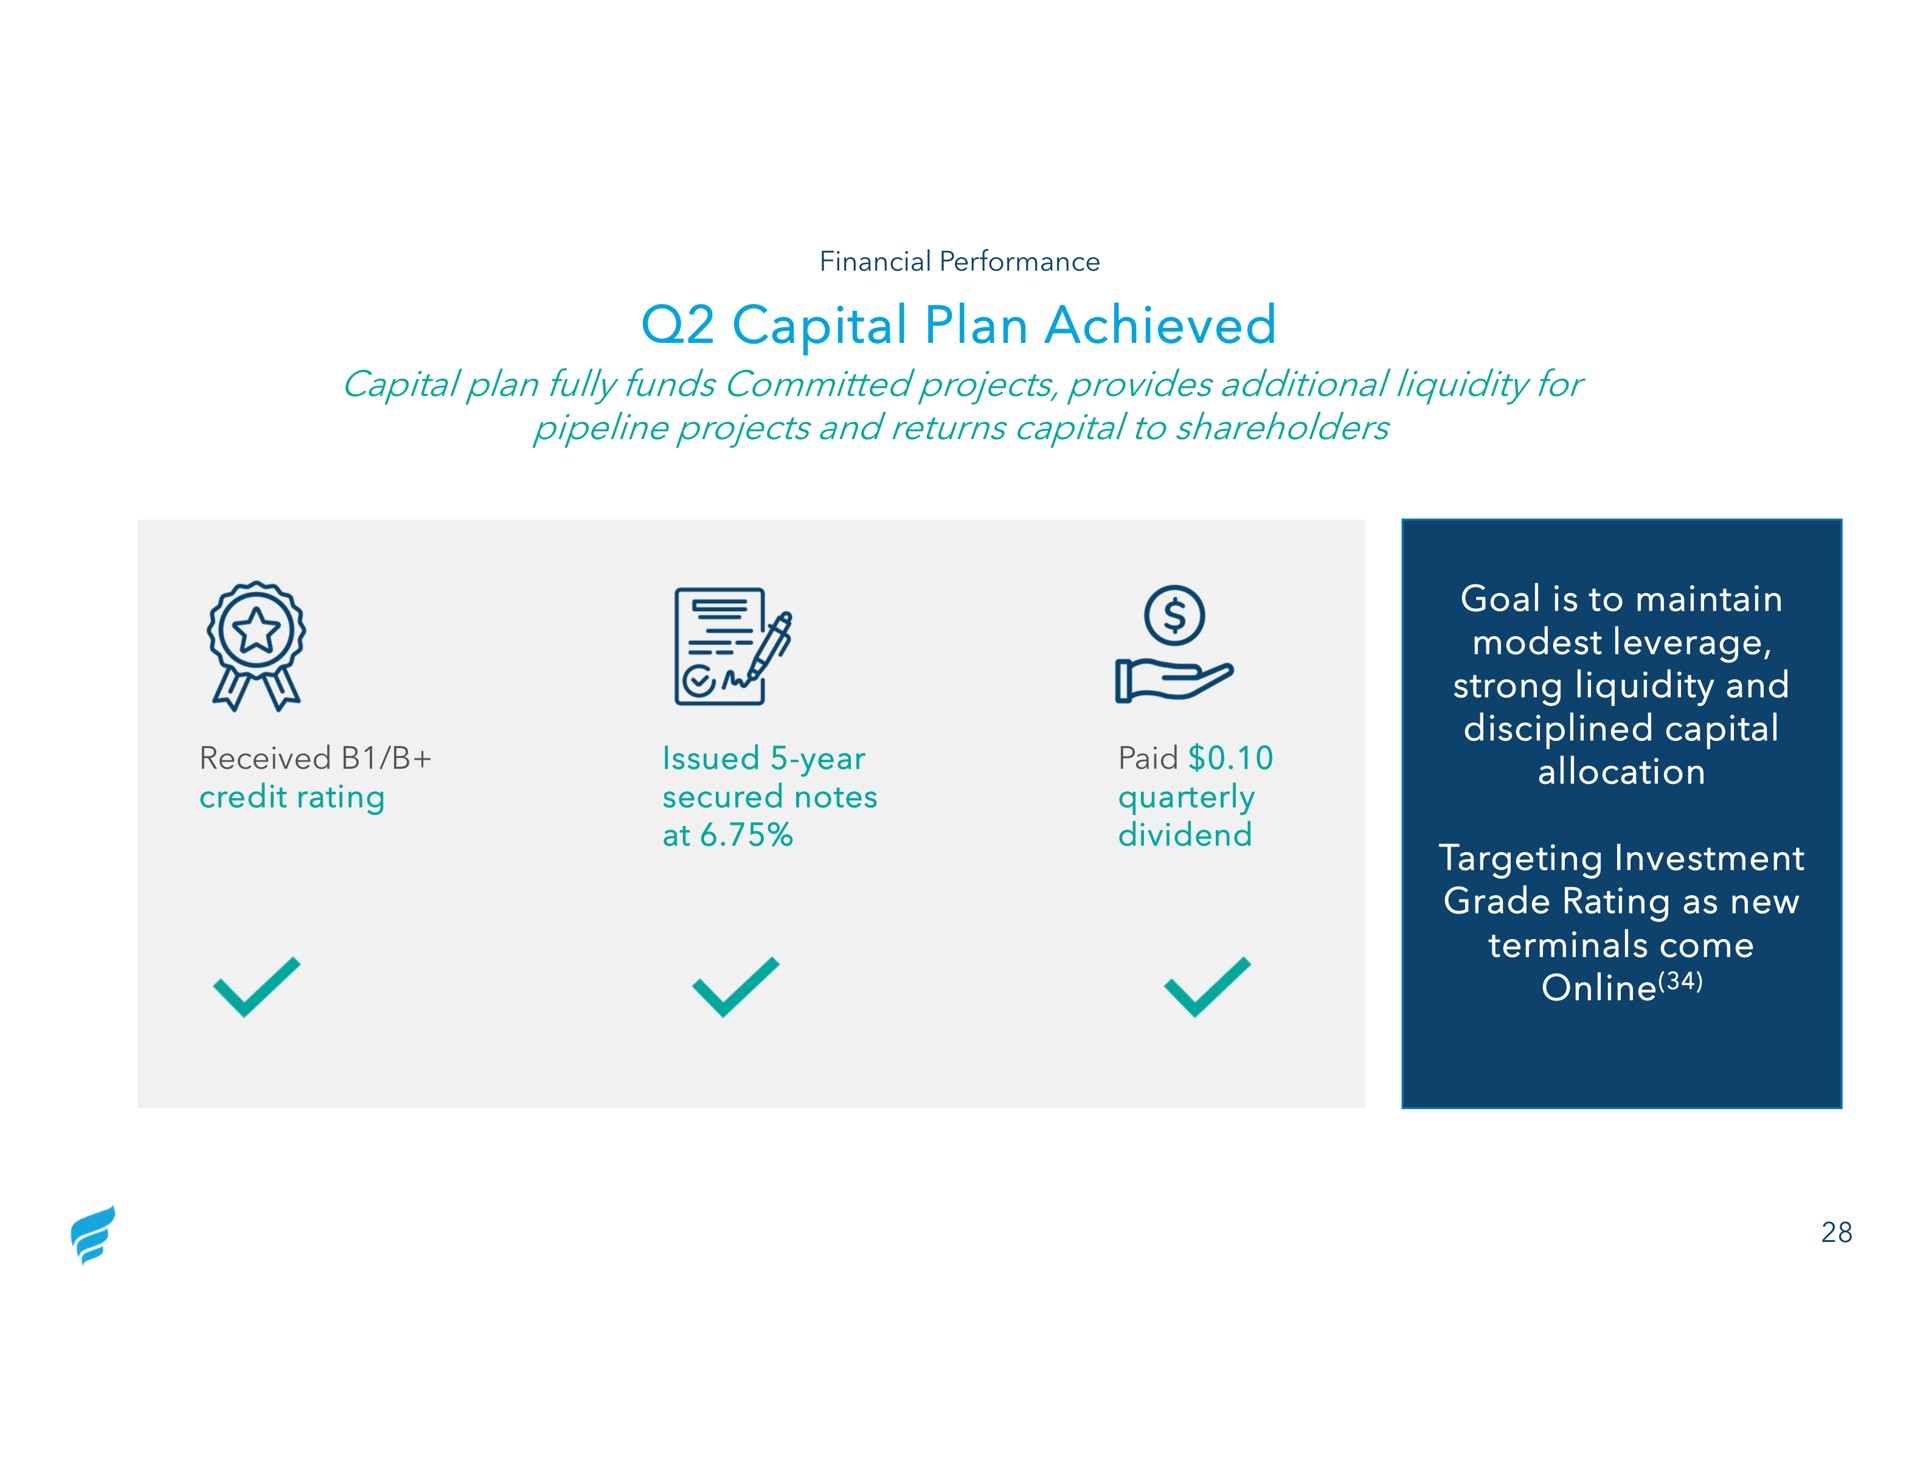 capital plan achieved capital plan fully funds committed projects provides additional liquidity for pipeline projects and returns capital to shareholders goal is to maintain modest leverage strong liquidity and disciplined capital allocation targeting investment grade rating as new terminals come | NewFortress Energy